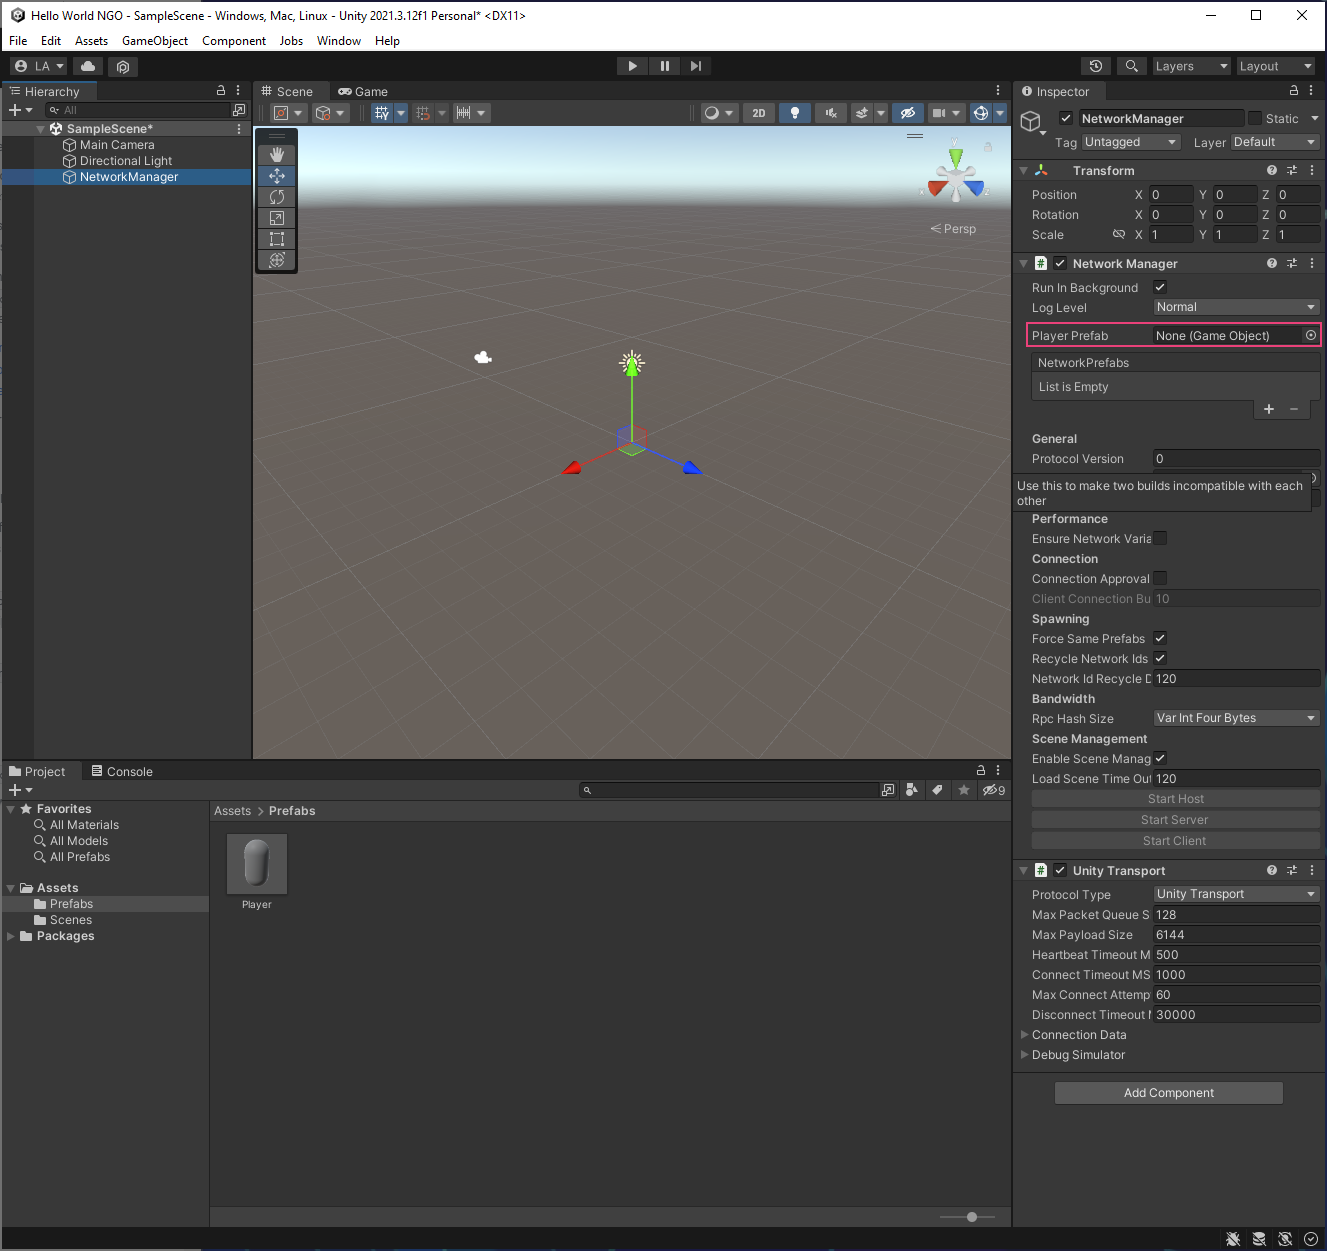 GitHub - IoT-Experts/Unity-King-of-the-Hill: Game created with Unity and C#